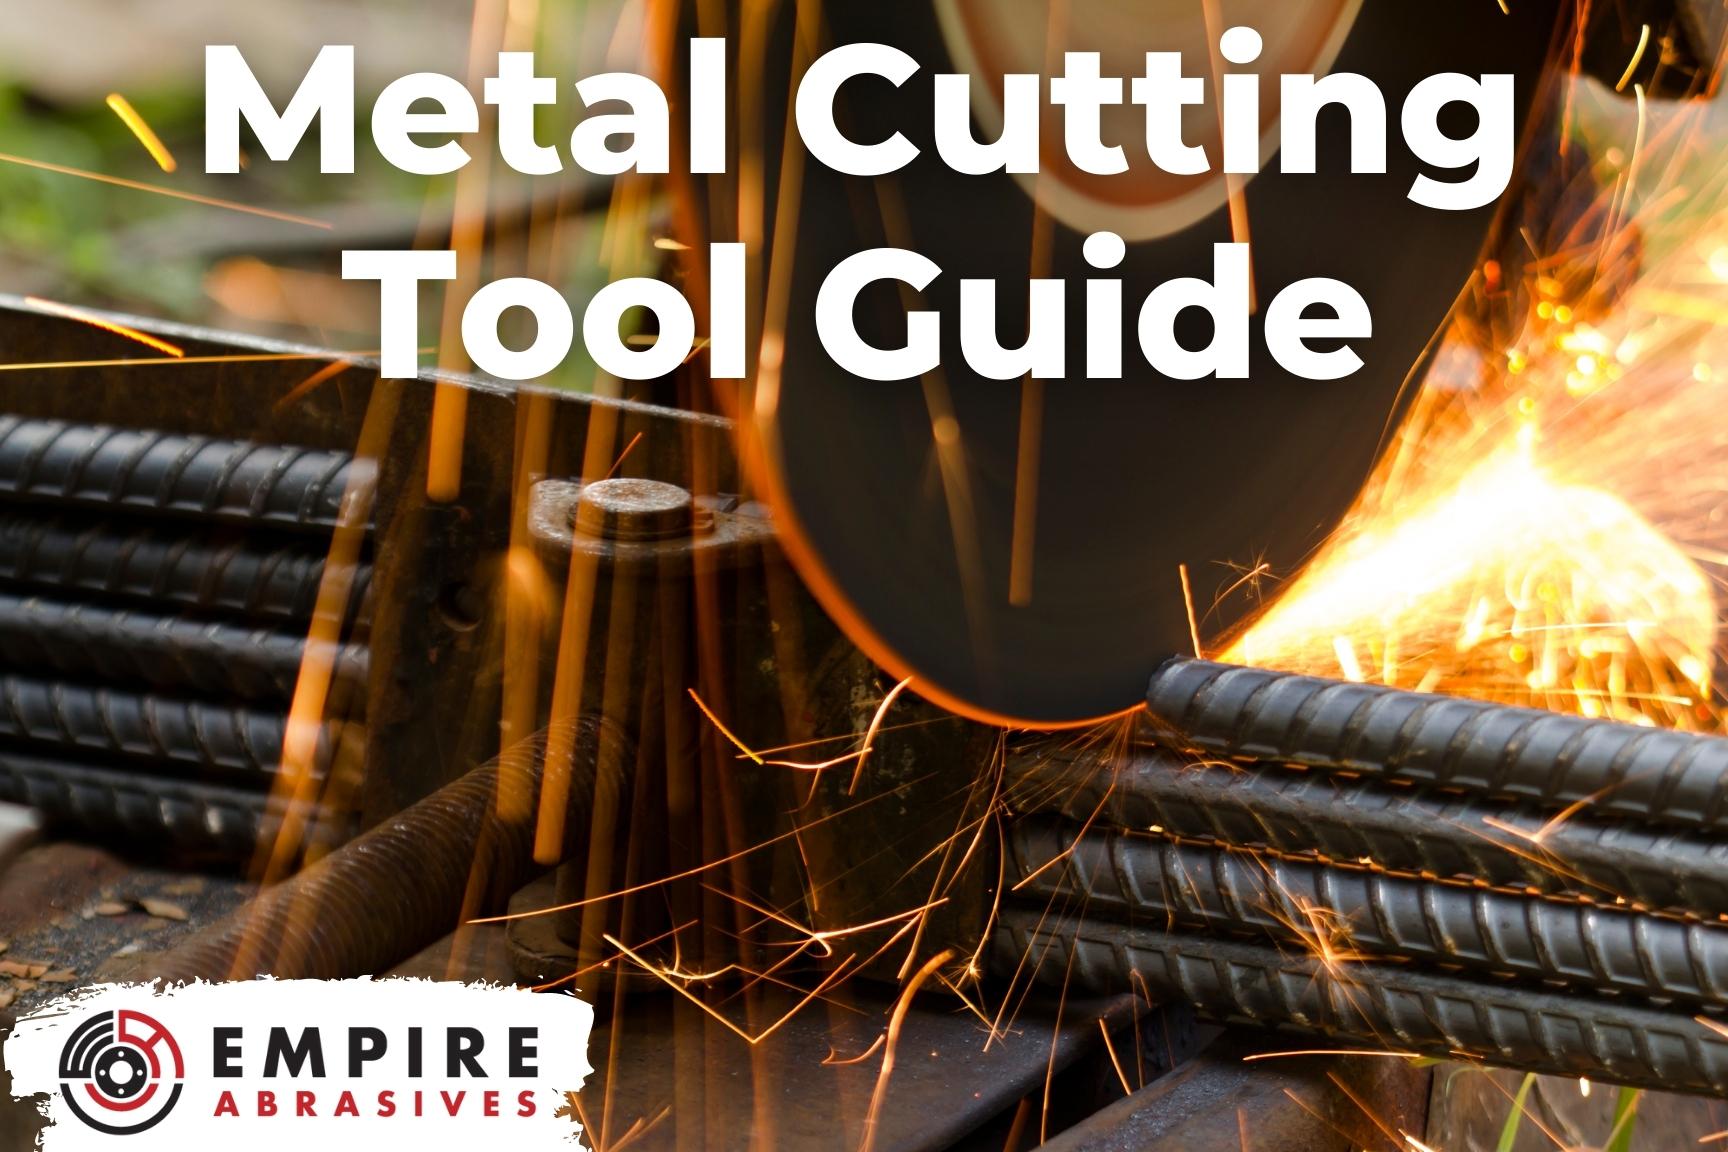 Metal Cutting Tools Guide - Handheld and Power Tools to Cut Metal - Empire  Abrasives